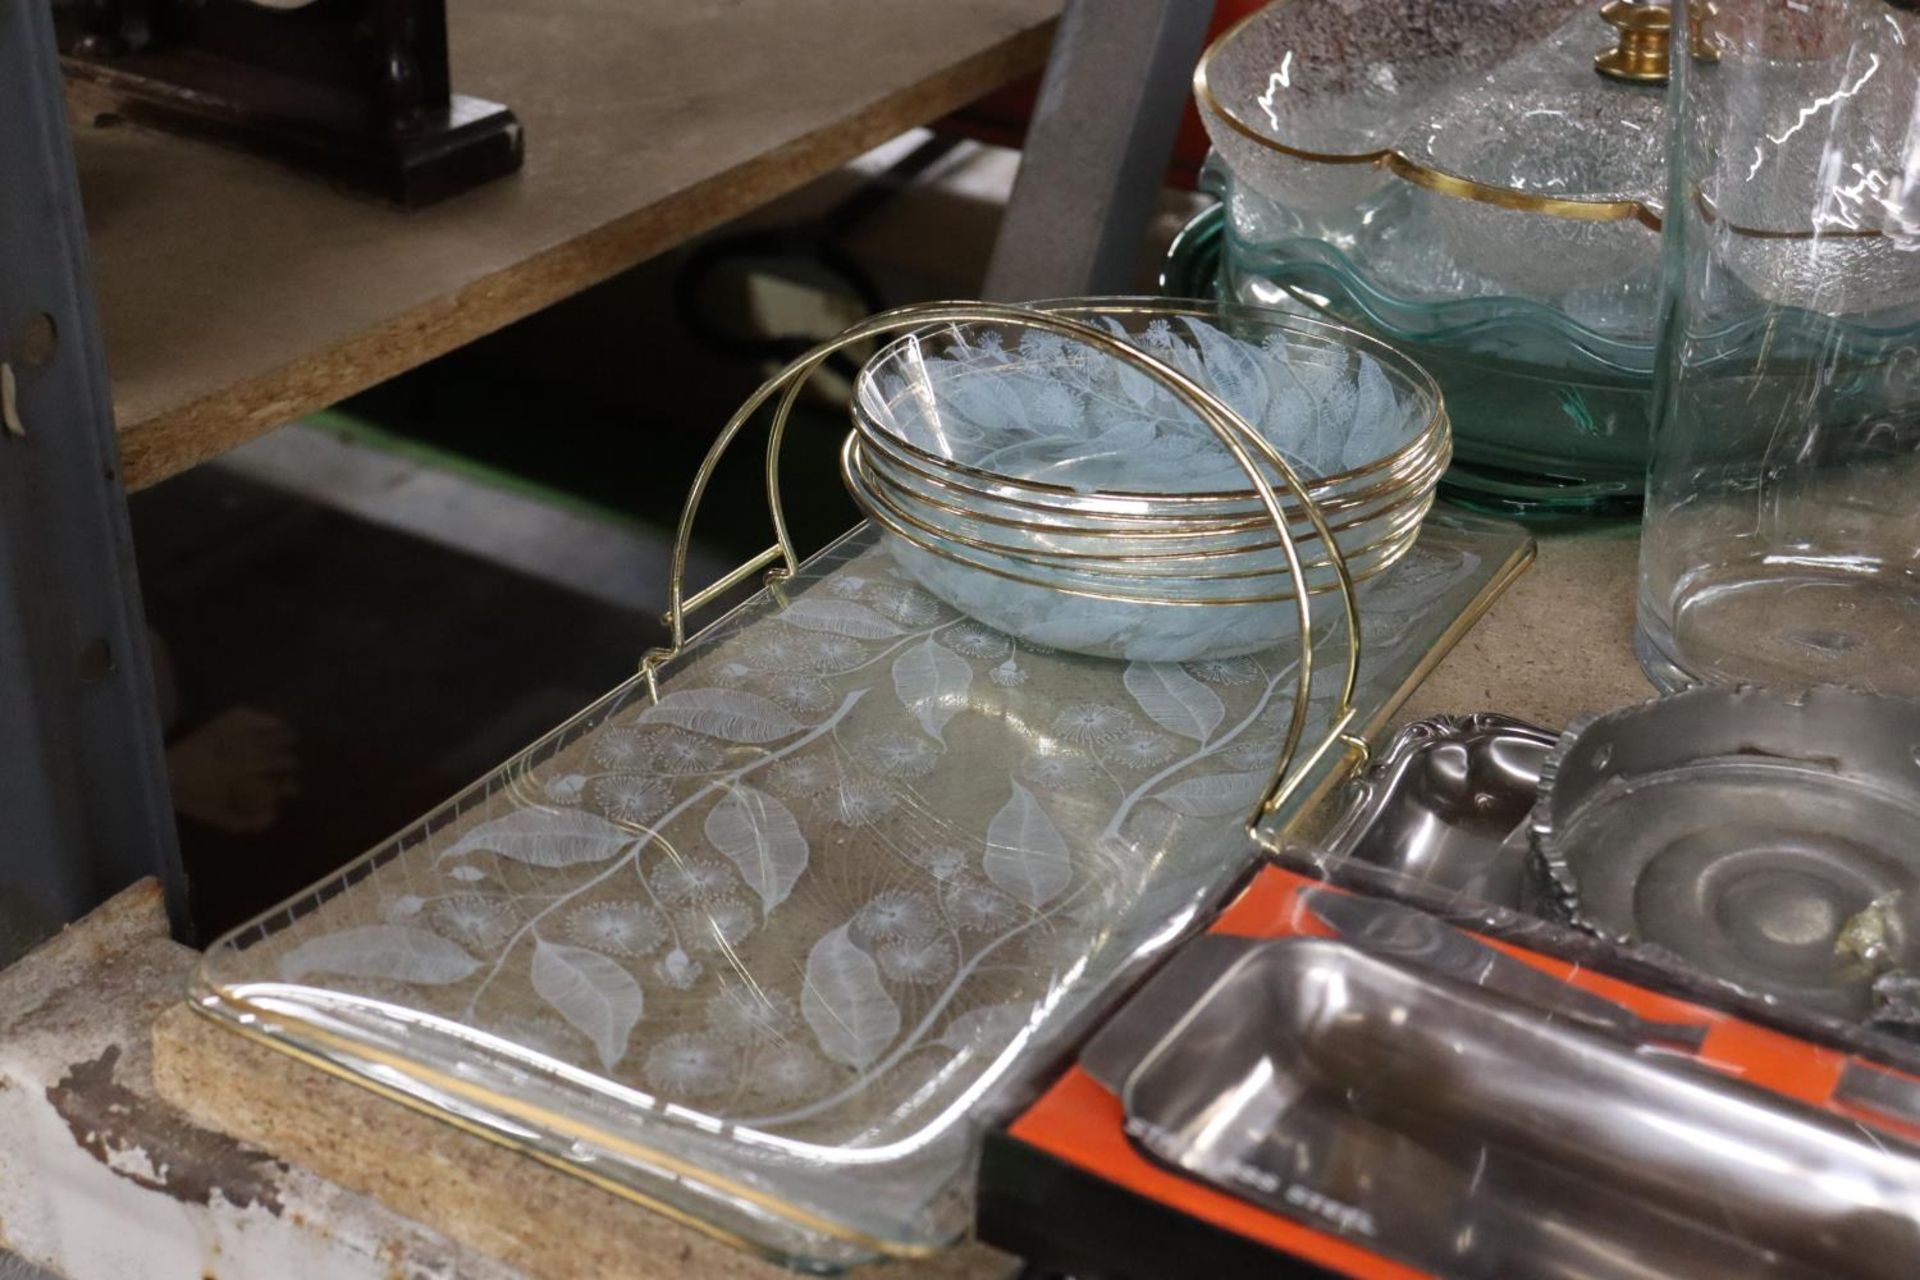 A QUANTITY OF GLASSWARE TO INCLUDE A VASE, PLATES, BOWLS, ETC - Image 3 of 5